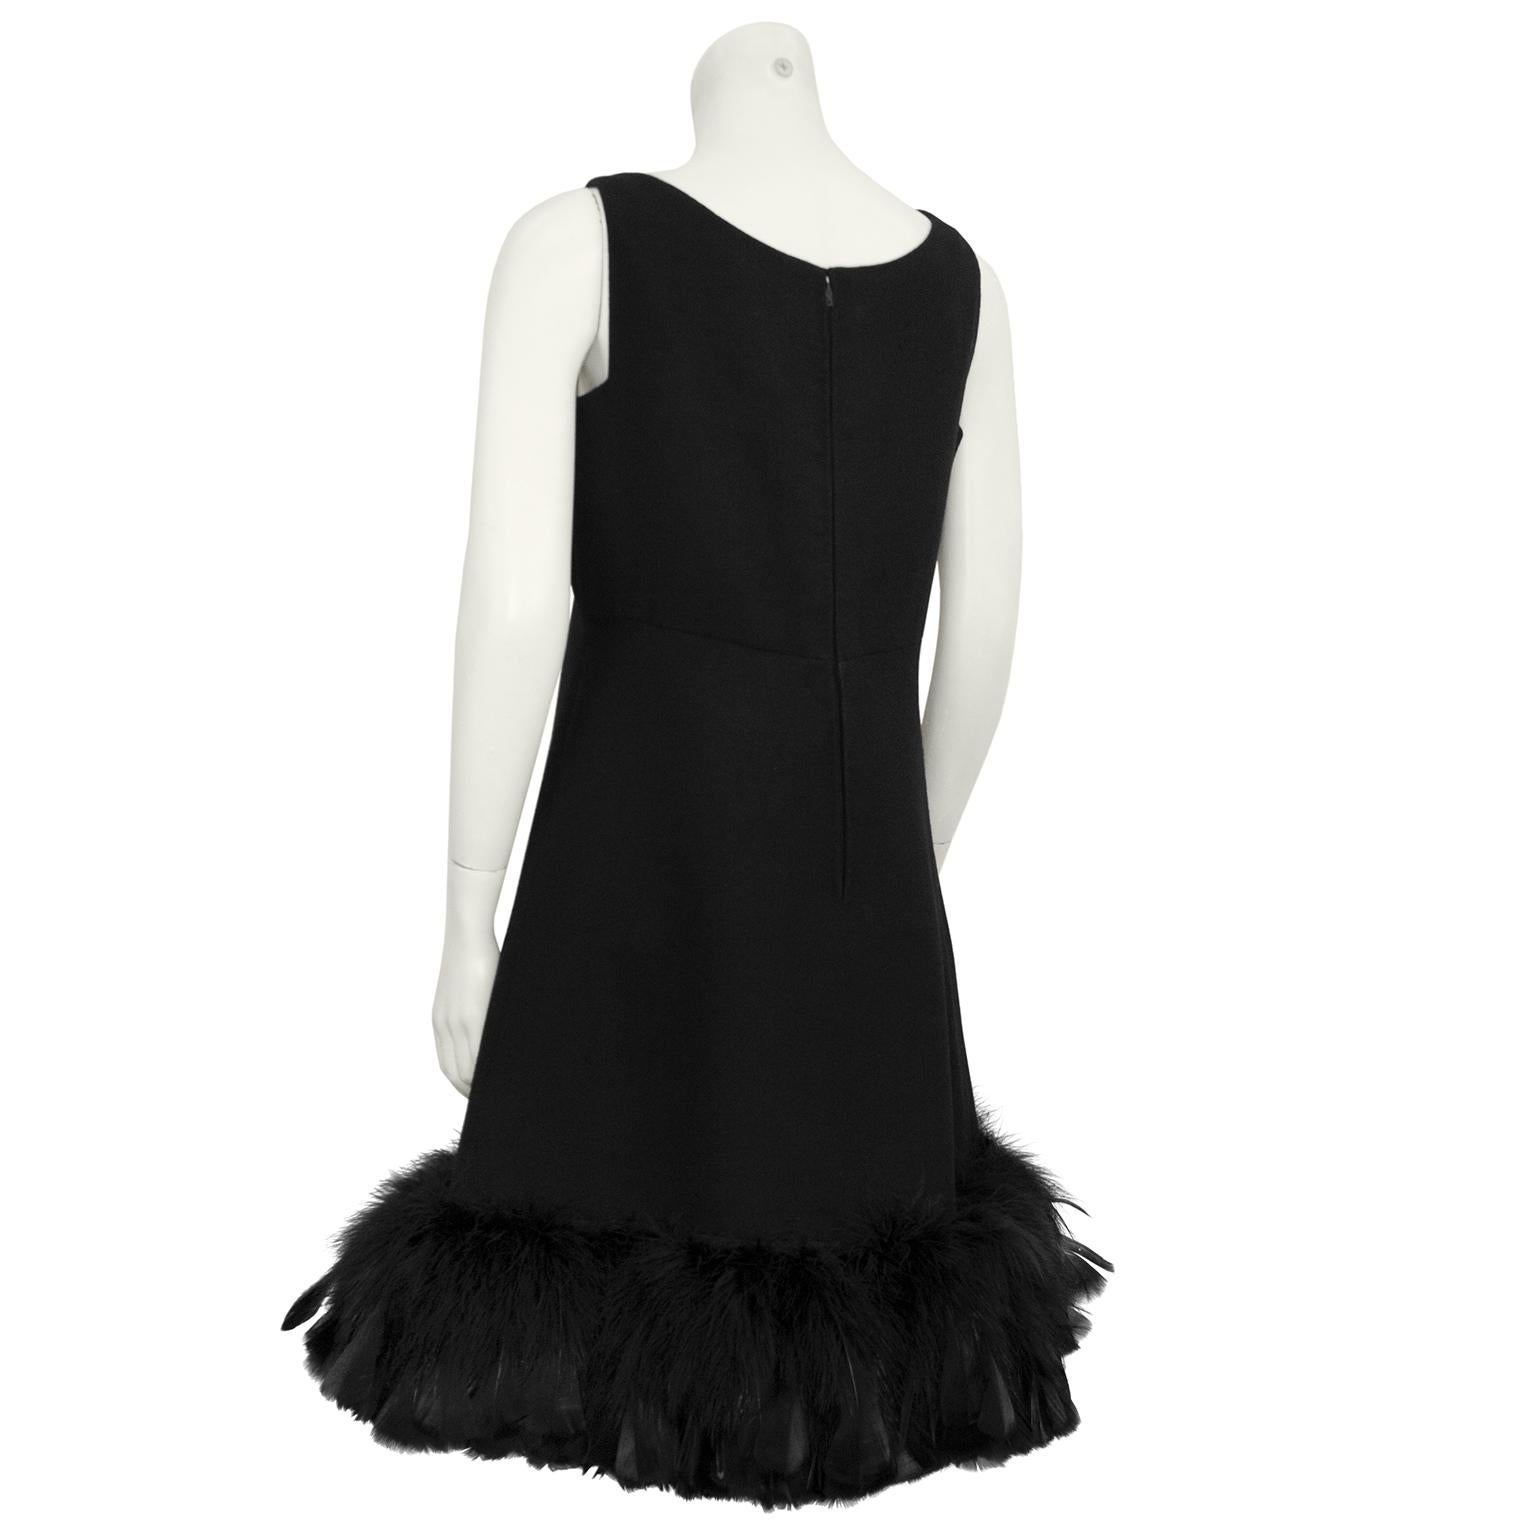 black dress with feathers